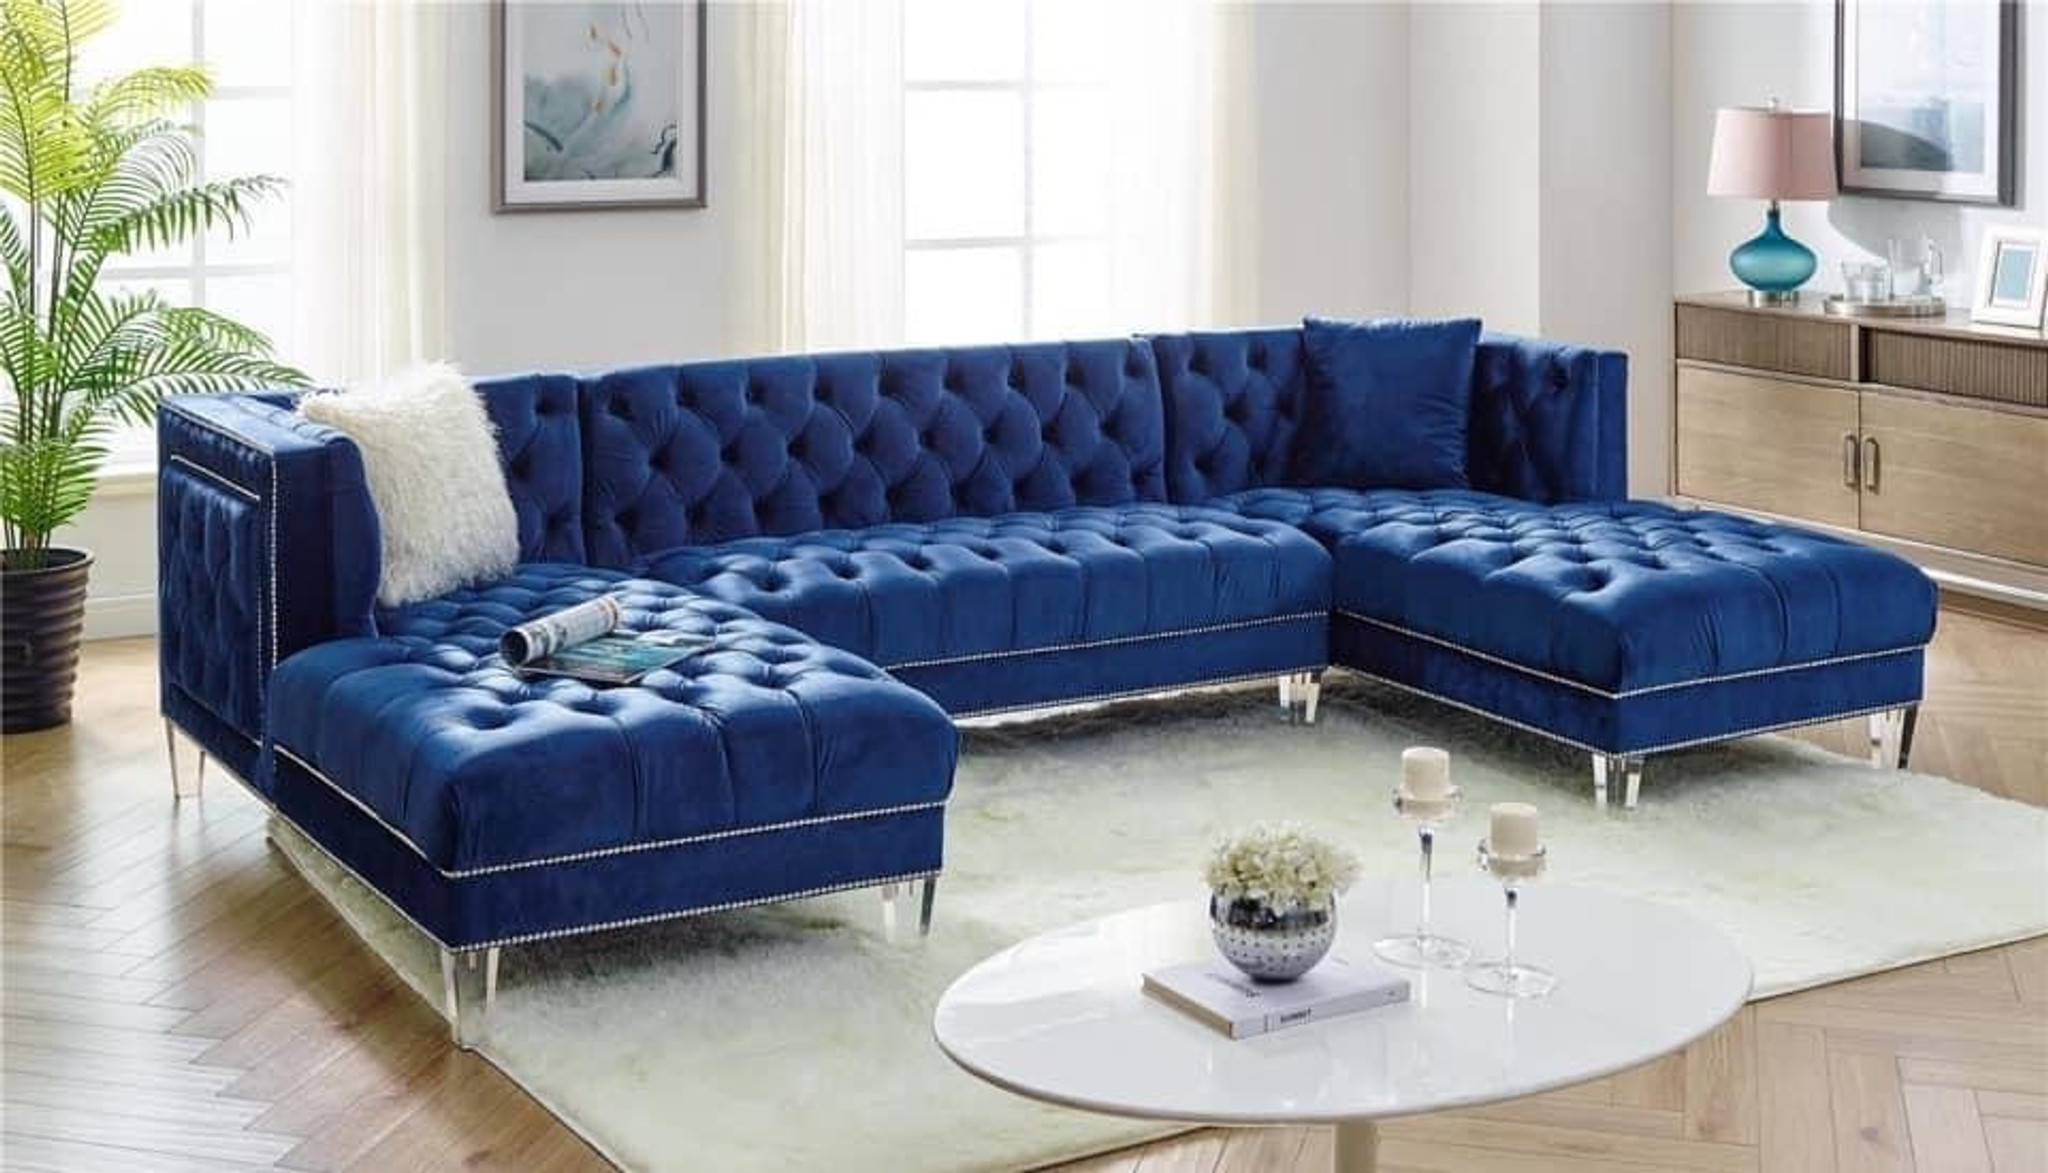 Prada Sectional Sofa In Blue Color Happy Home Industries Houston Texas